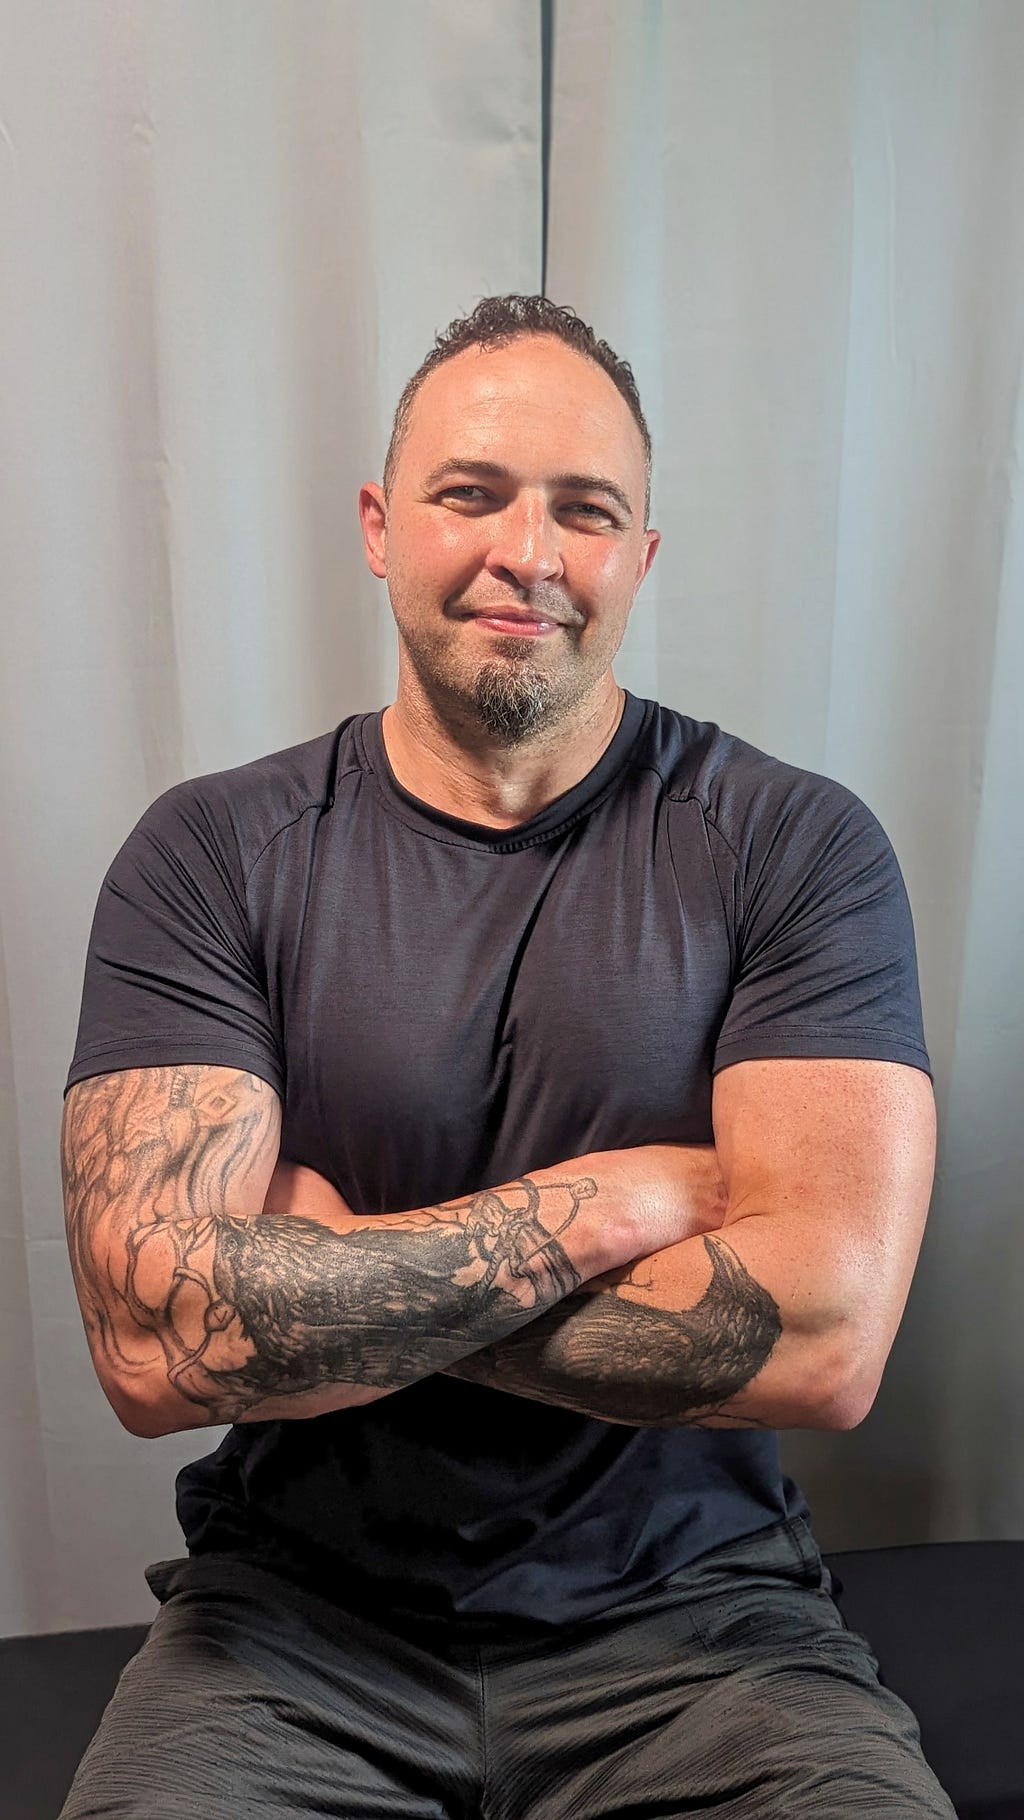 Metahuman Dave is sitting on a workout bench with his arms crossed. Wearing a black T-Shirt. His arm tattoos are visible. Two ravens on his forearms. He is smiling at the camera. This photo was used in his profile picture.